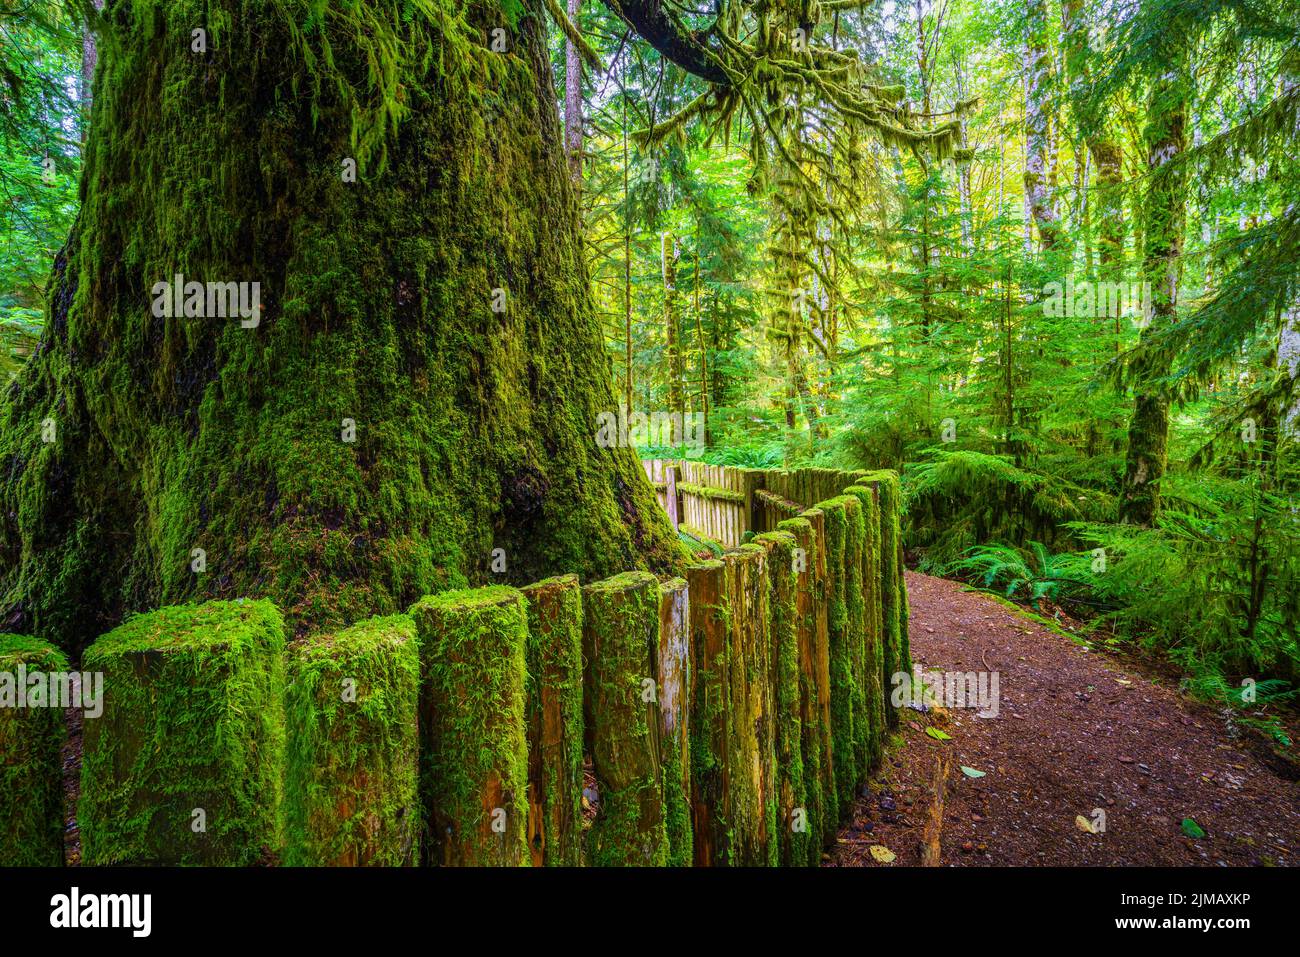 The massive trunk of the ancient sitka spruce tree at Harris Creek in British Columbia Stock Photo